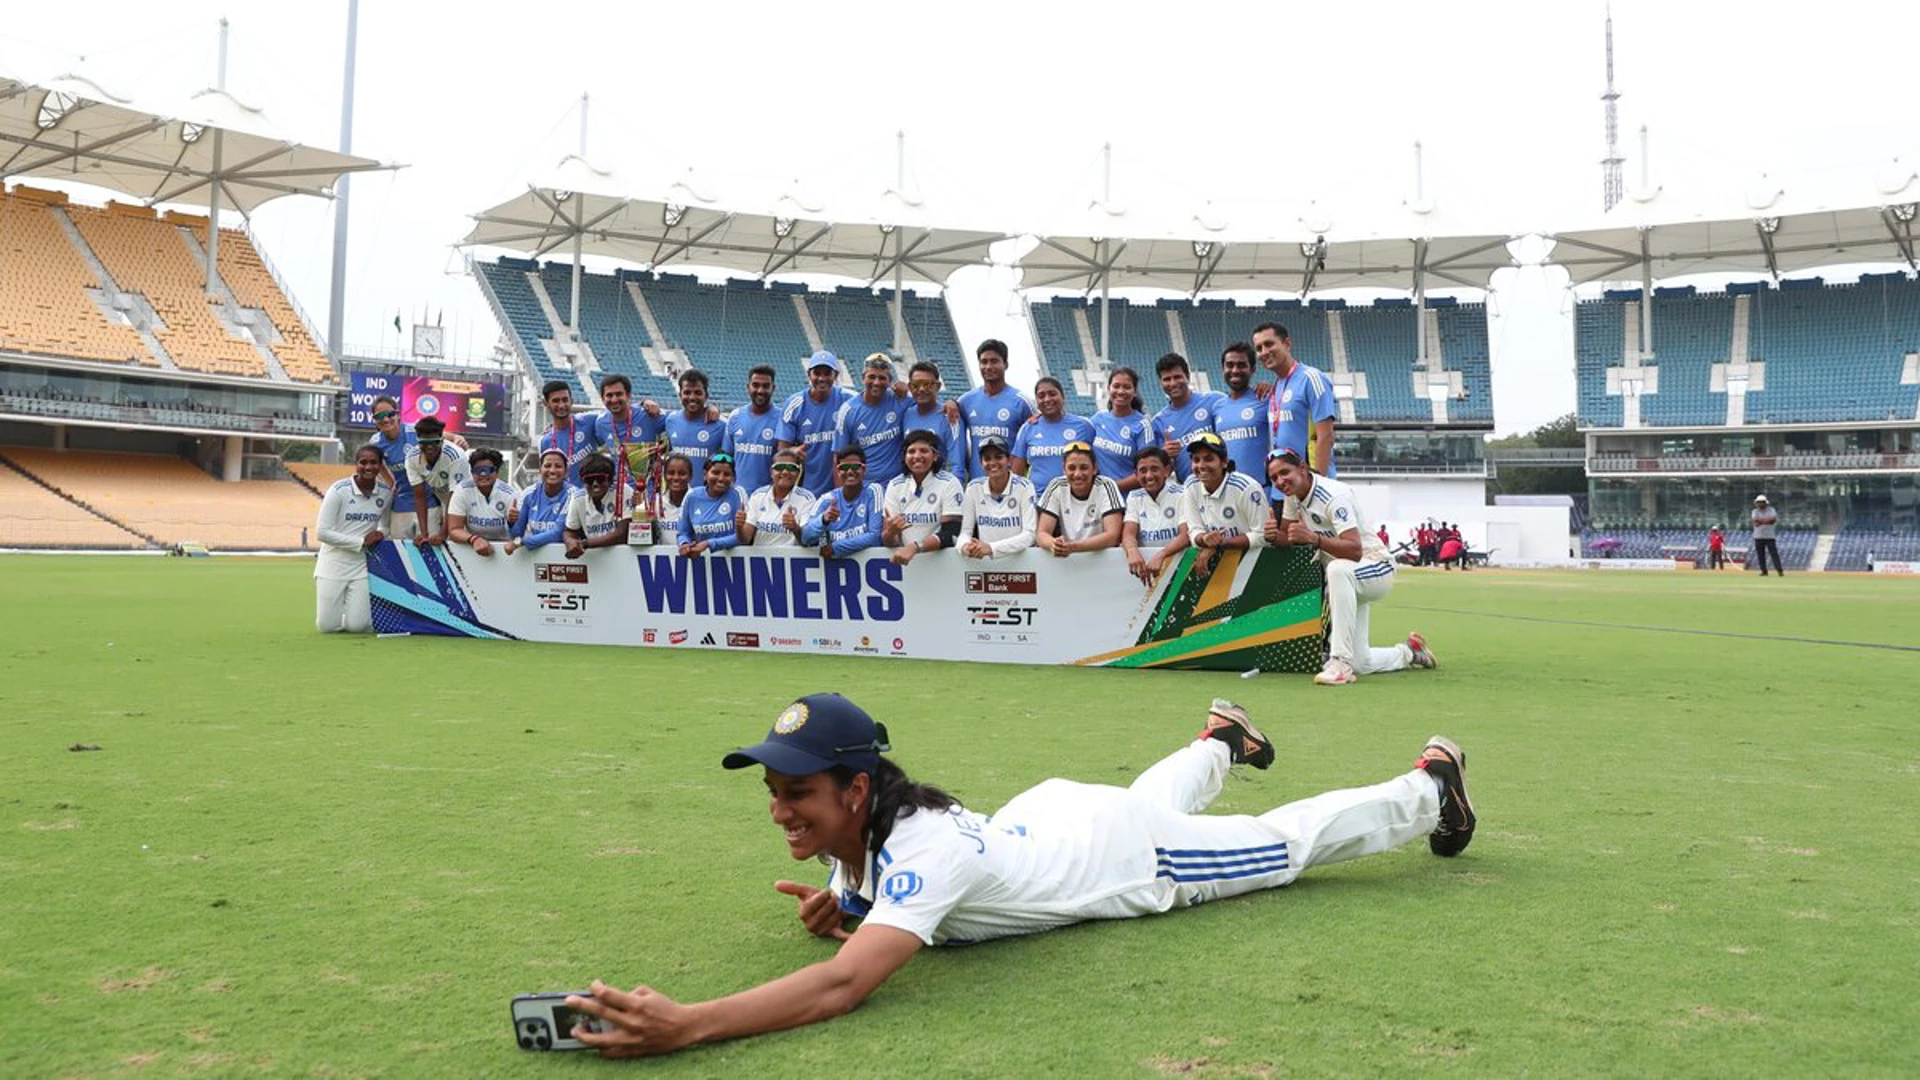 CONVINCING WIN: India thrash South Africa in Women's test